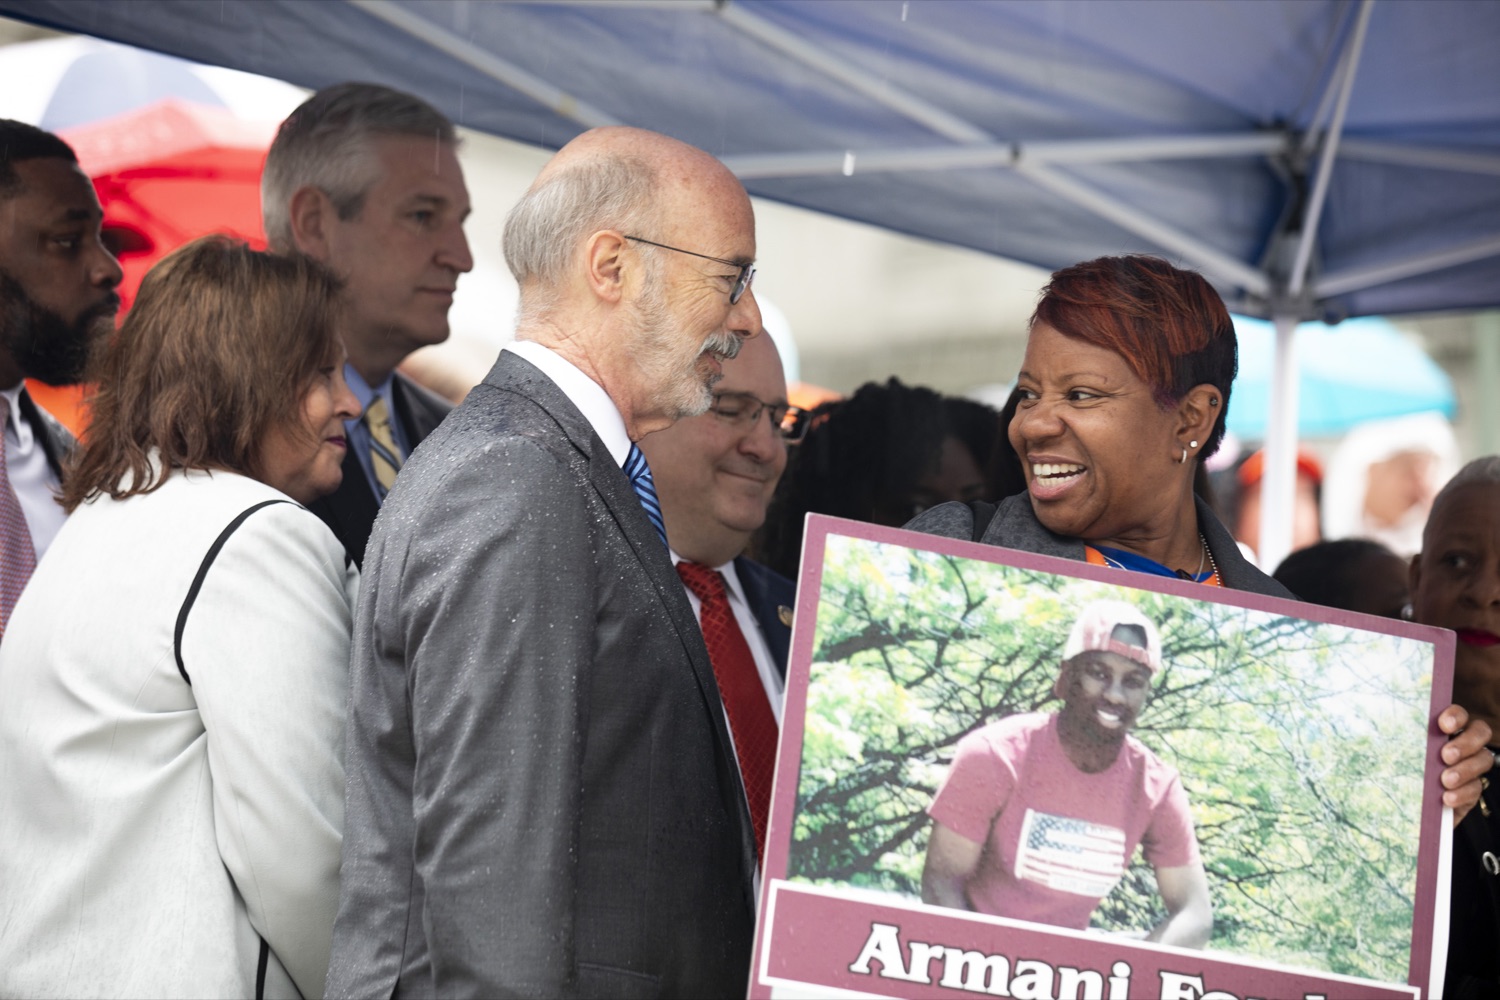 Governor Tom Wolf, joined by CeaseFirePA and more than 200 Pennsylvanians at the Capitol, calls for legislative action to save lives against gun violence, in Harrisburg, PA on April 26, 2022.<br><a href="https://filesource.amperwave.net/commonwealthofpa/photo/20782_gov_ceaseFirePA_12.JPG" target="_blank">⇣ Download Photo</a>